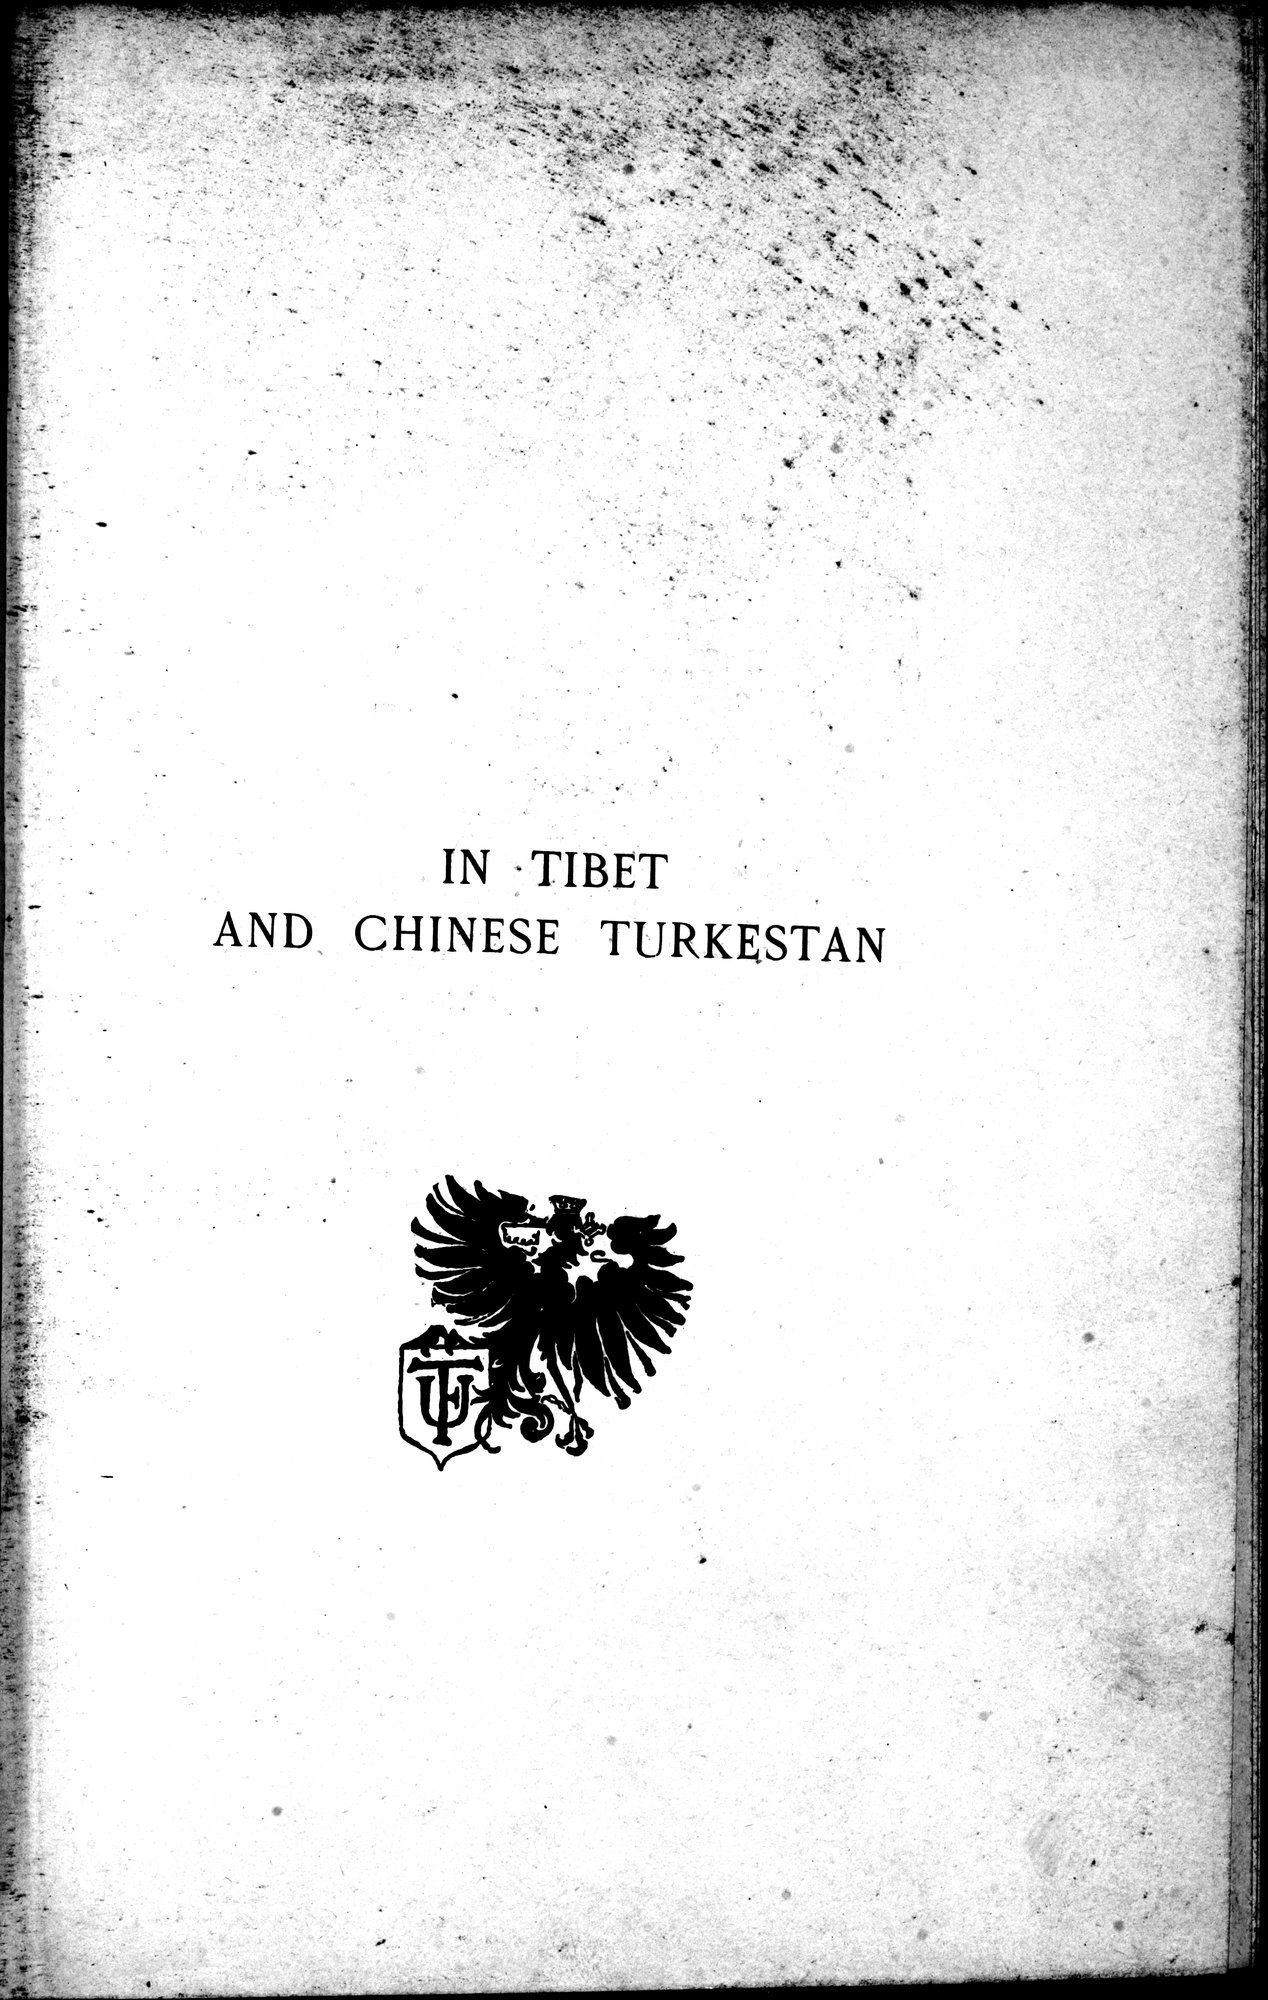 In Tibet and Chinese Turkestan : vol.1 / Page 7 (Grayscale High Resolution Image)